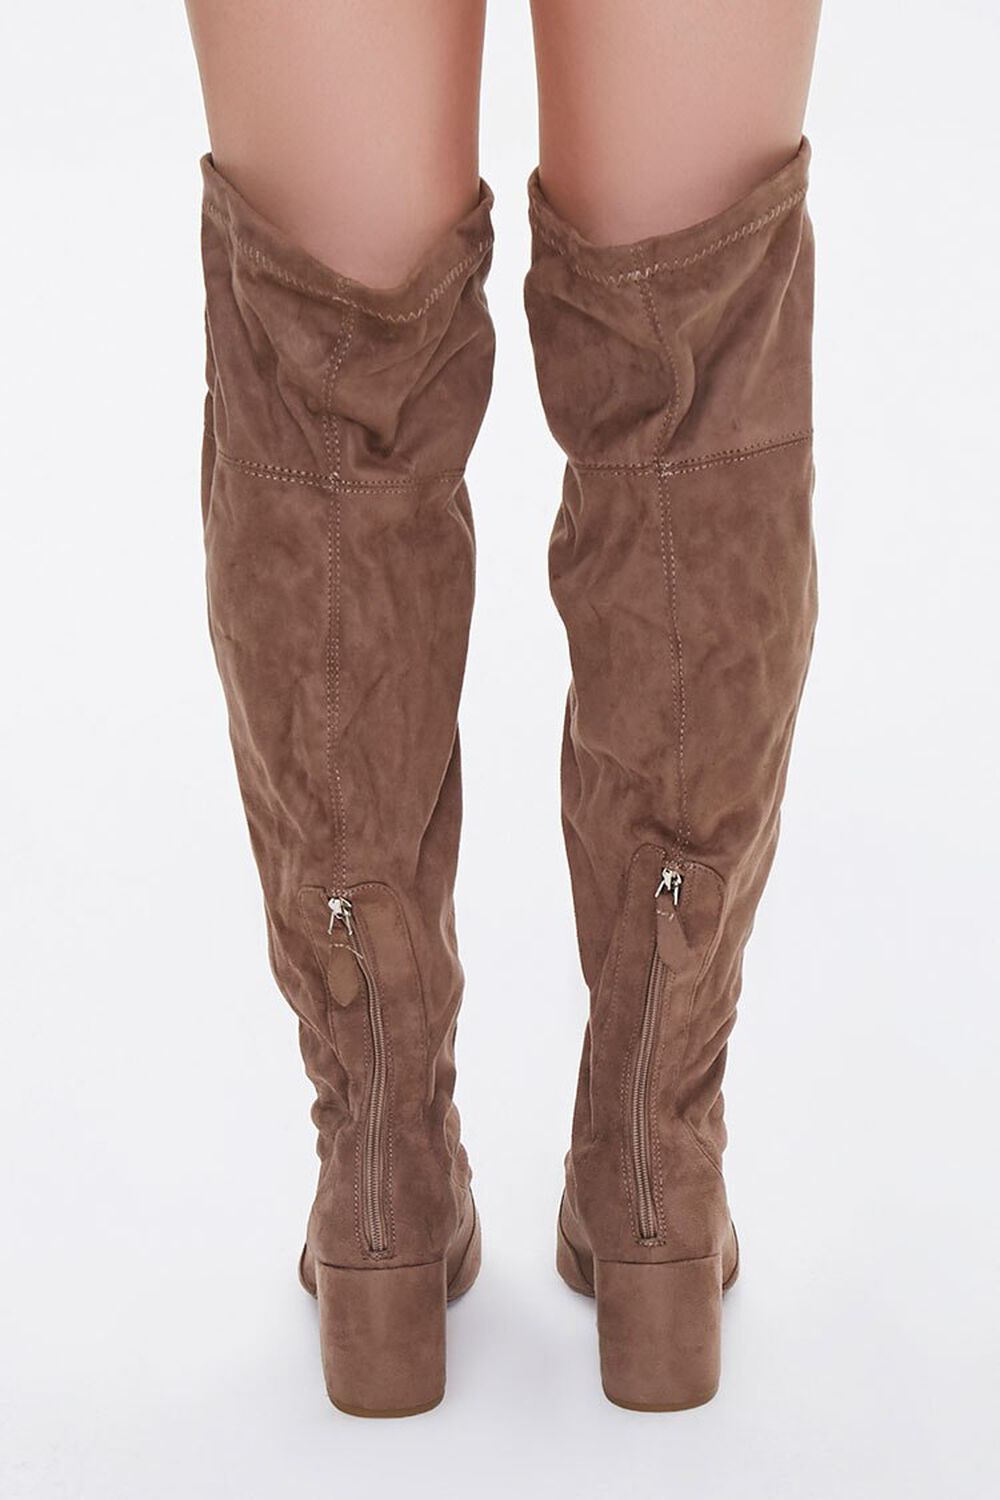 TAUPE Faux Suede Over-the-Knee Boots (Wide), image 3